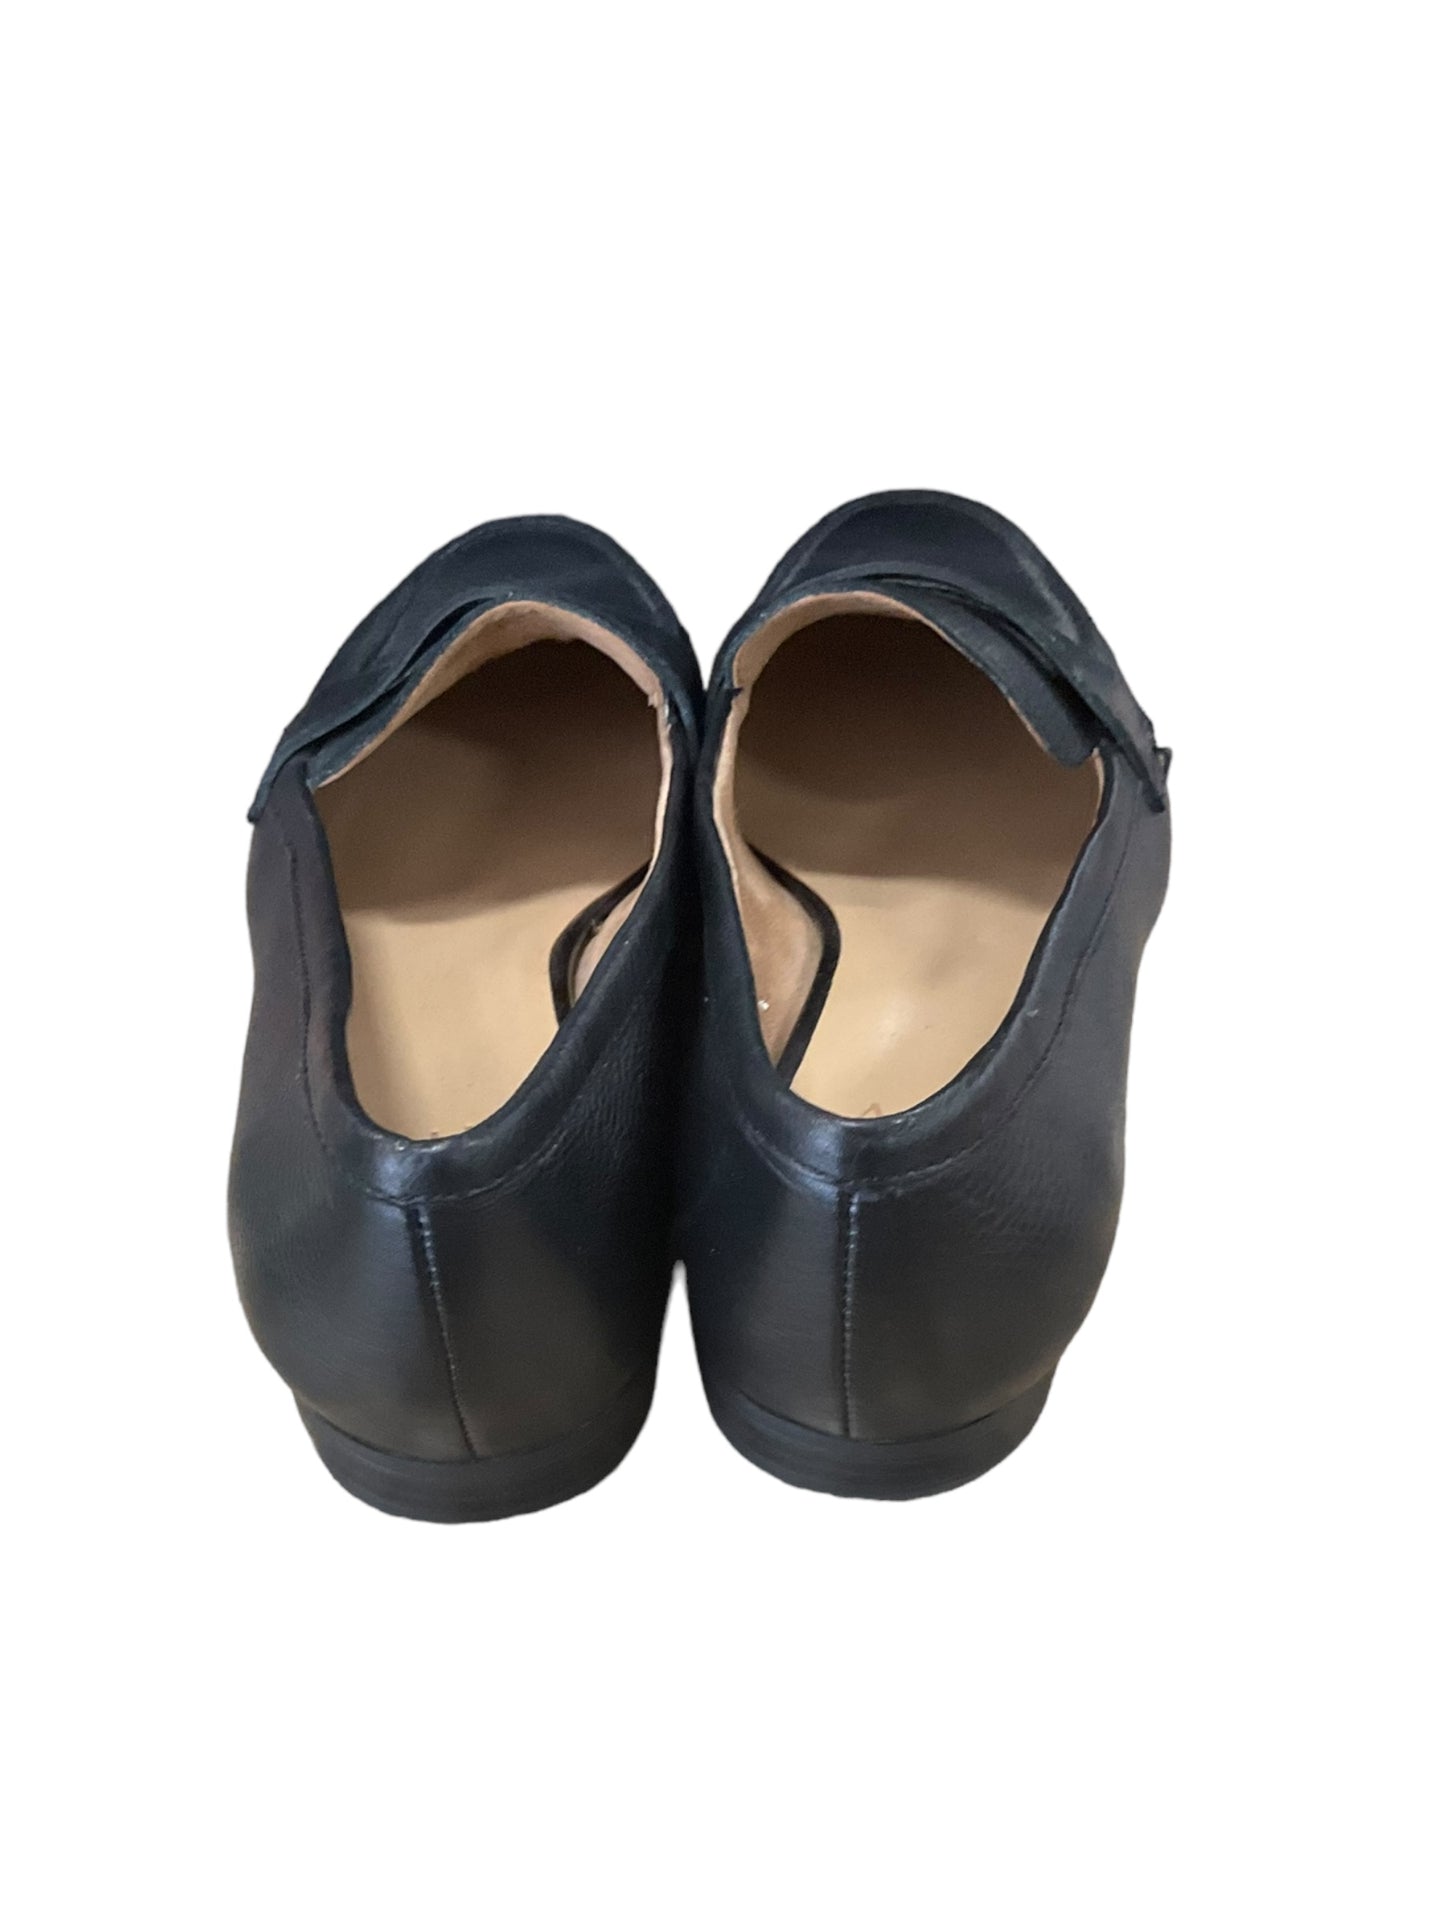 Shoes Flats By Naturalizer  Size: 7